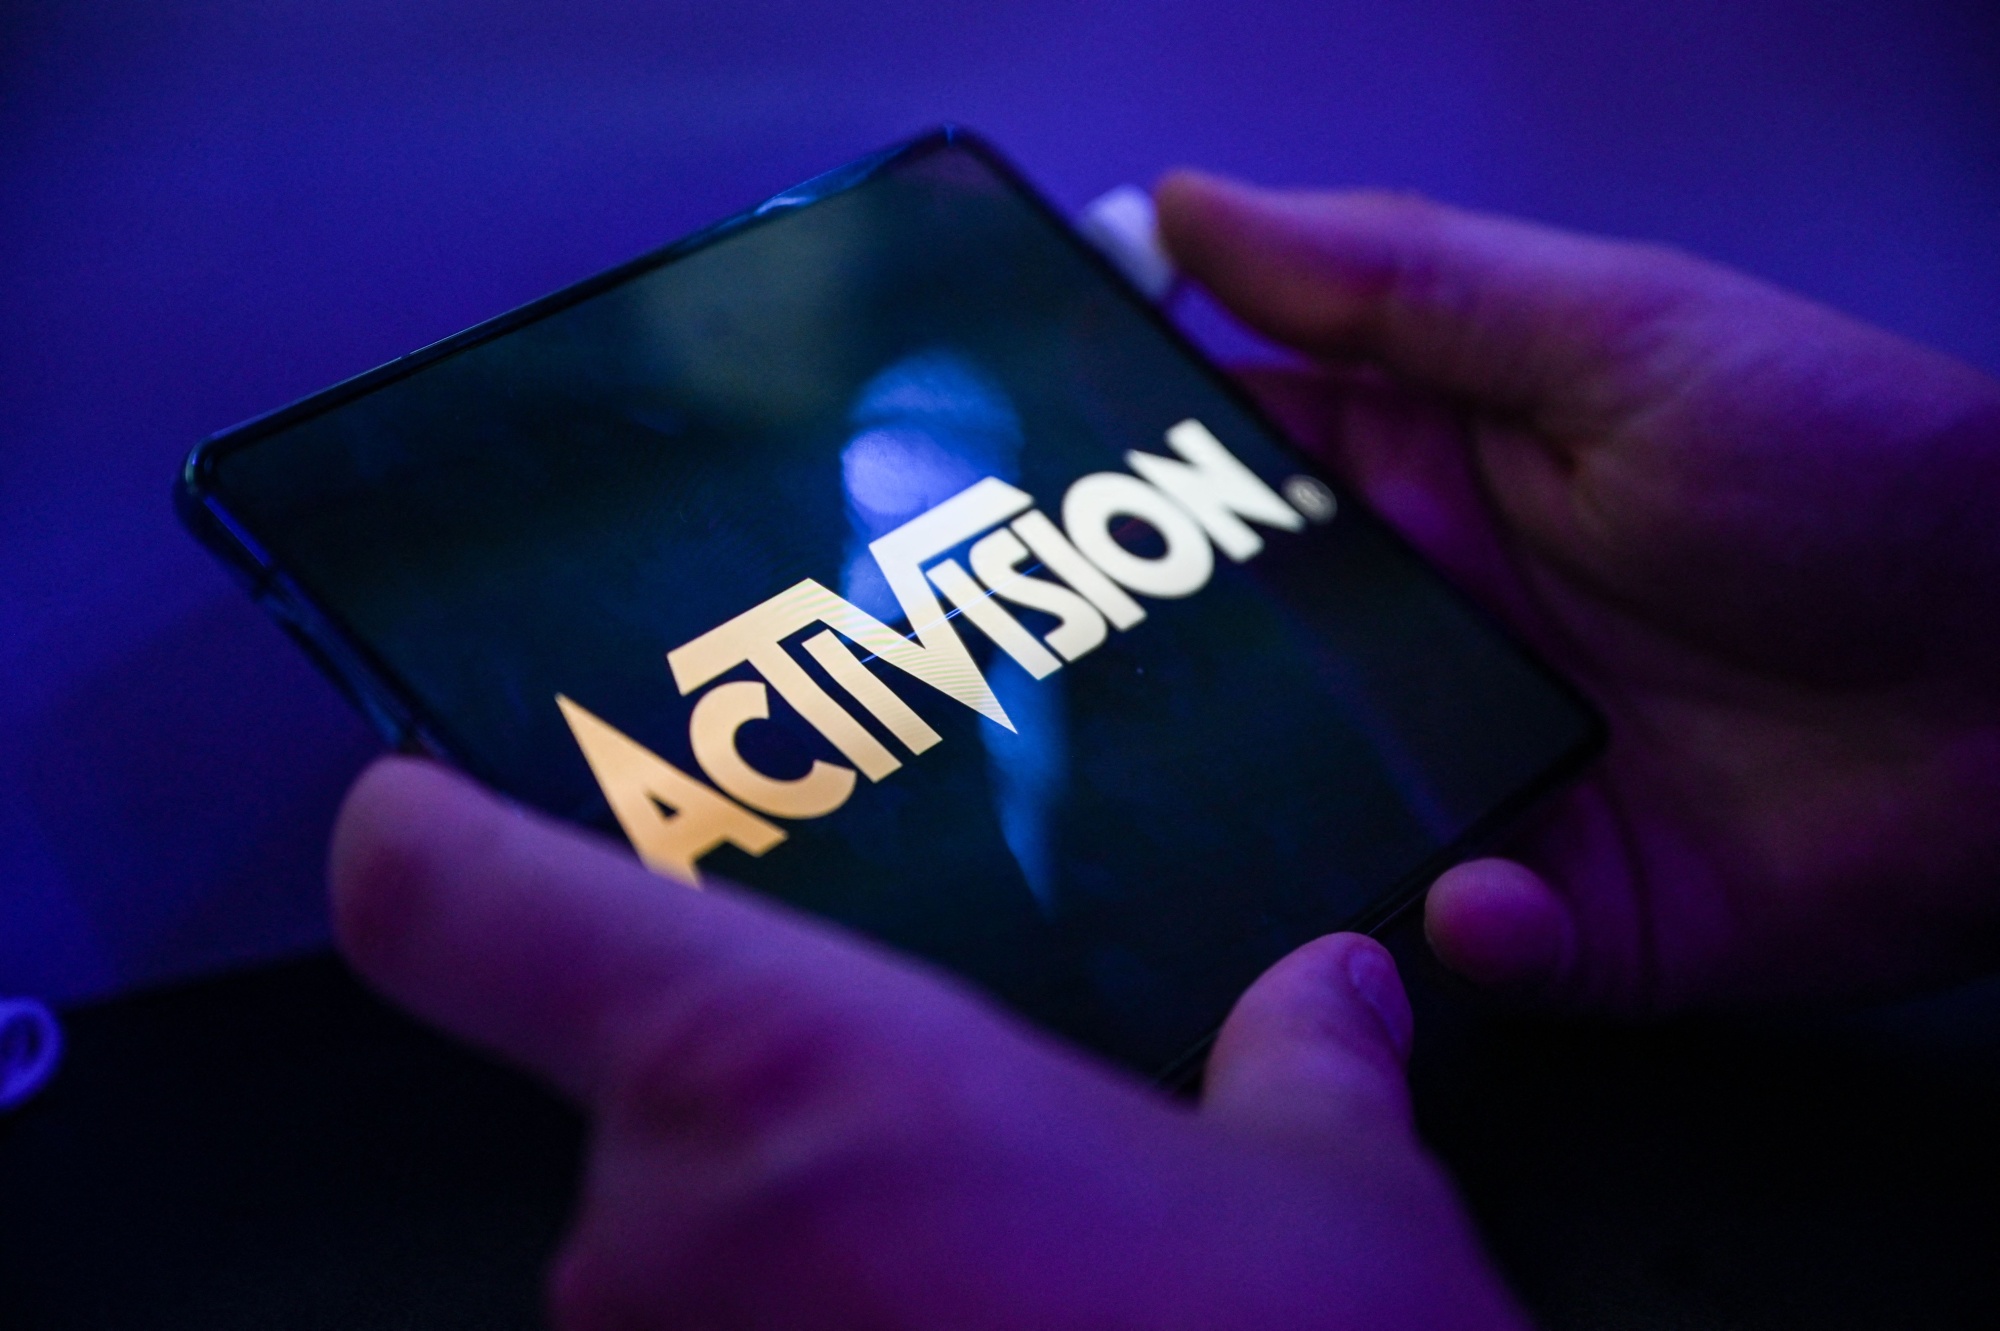 Microsoft's $69 Billion Activision Deal Nears Approval As U.K. Looks Poised  To Clear Gaming Takeover